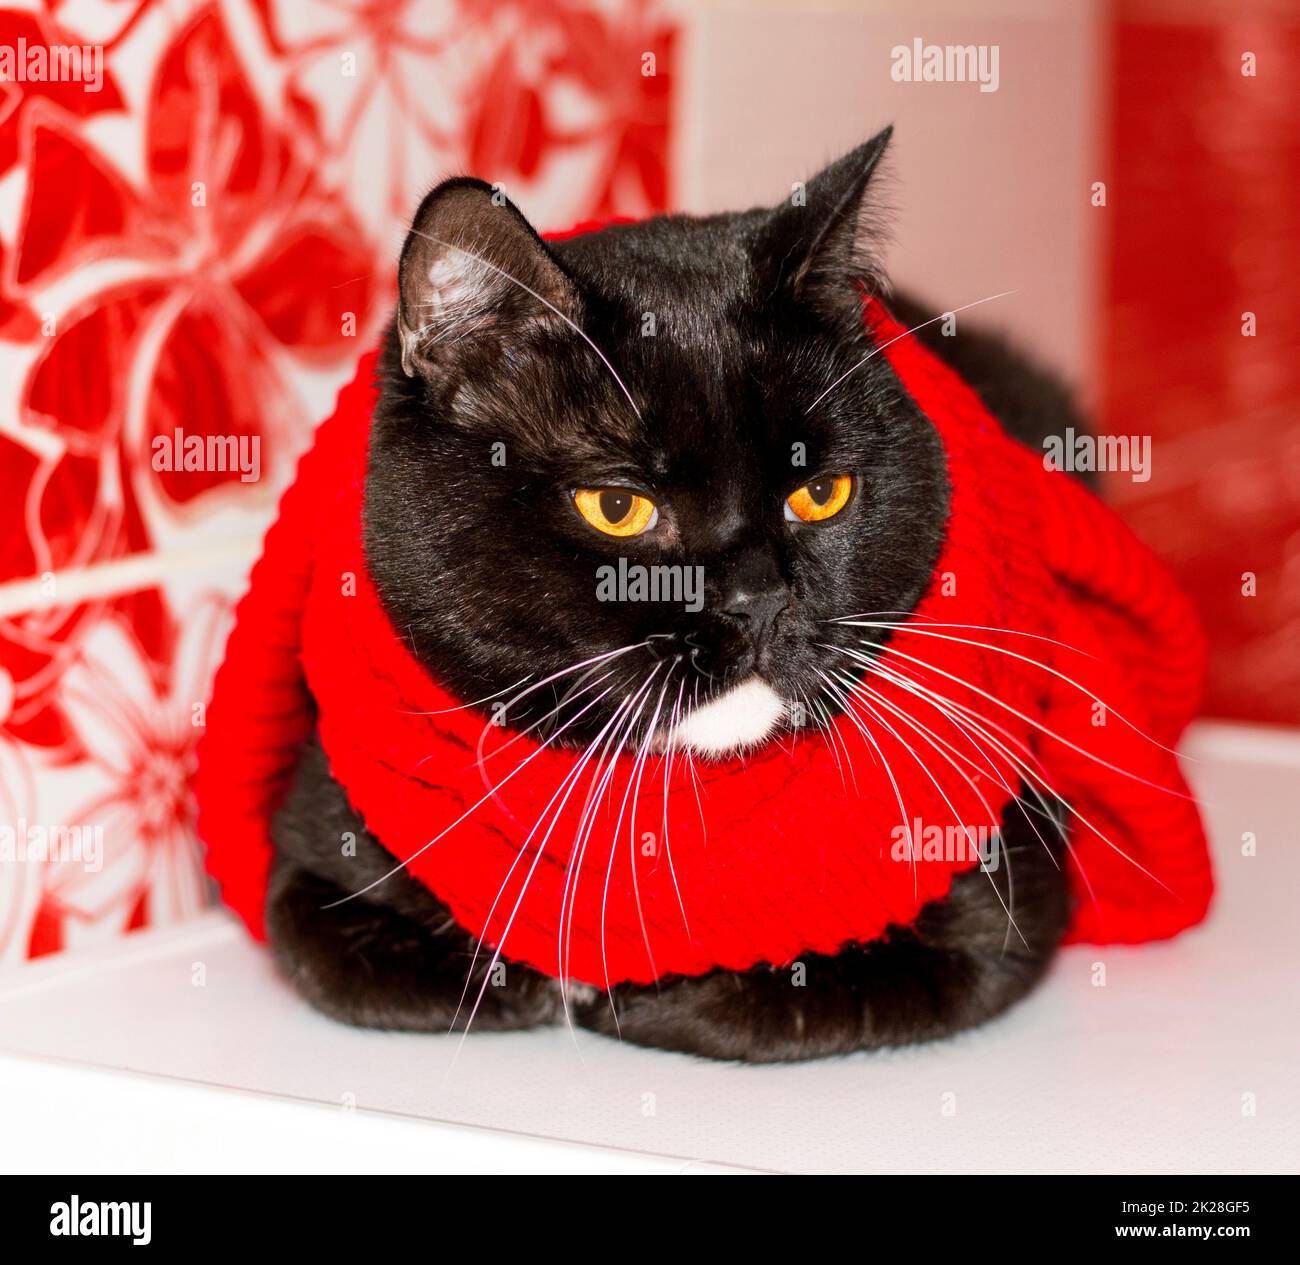 Scottish-british bicolor cat close-up in a red scarf on a red background Stock Photo